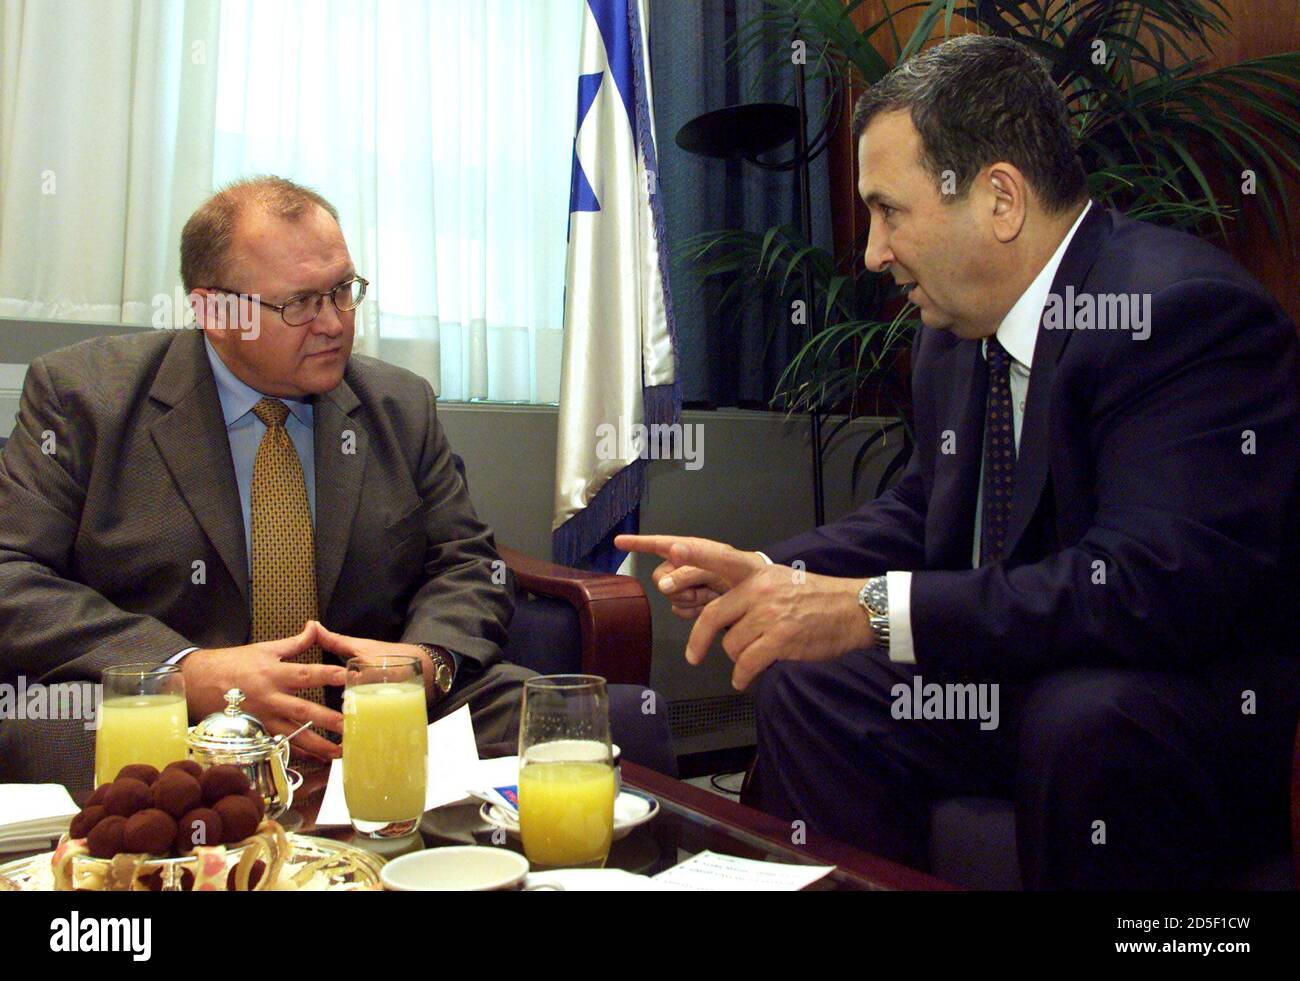 Prime Minister Ehud Barak (R) chats with visiting Swedish Prime Minister Goran Persson, the first Swedish Prime Minister to visit the State of Israel since 1962, as they meet in Barak's office october 6. The last Israeli Prime Minister to visit Sweden was David Ben Gurion in 1962.  JWH/FMS Stock Photo